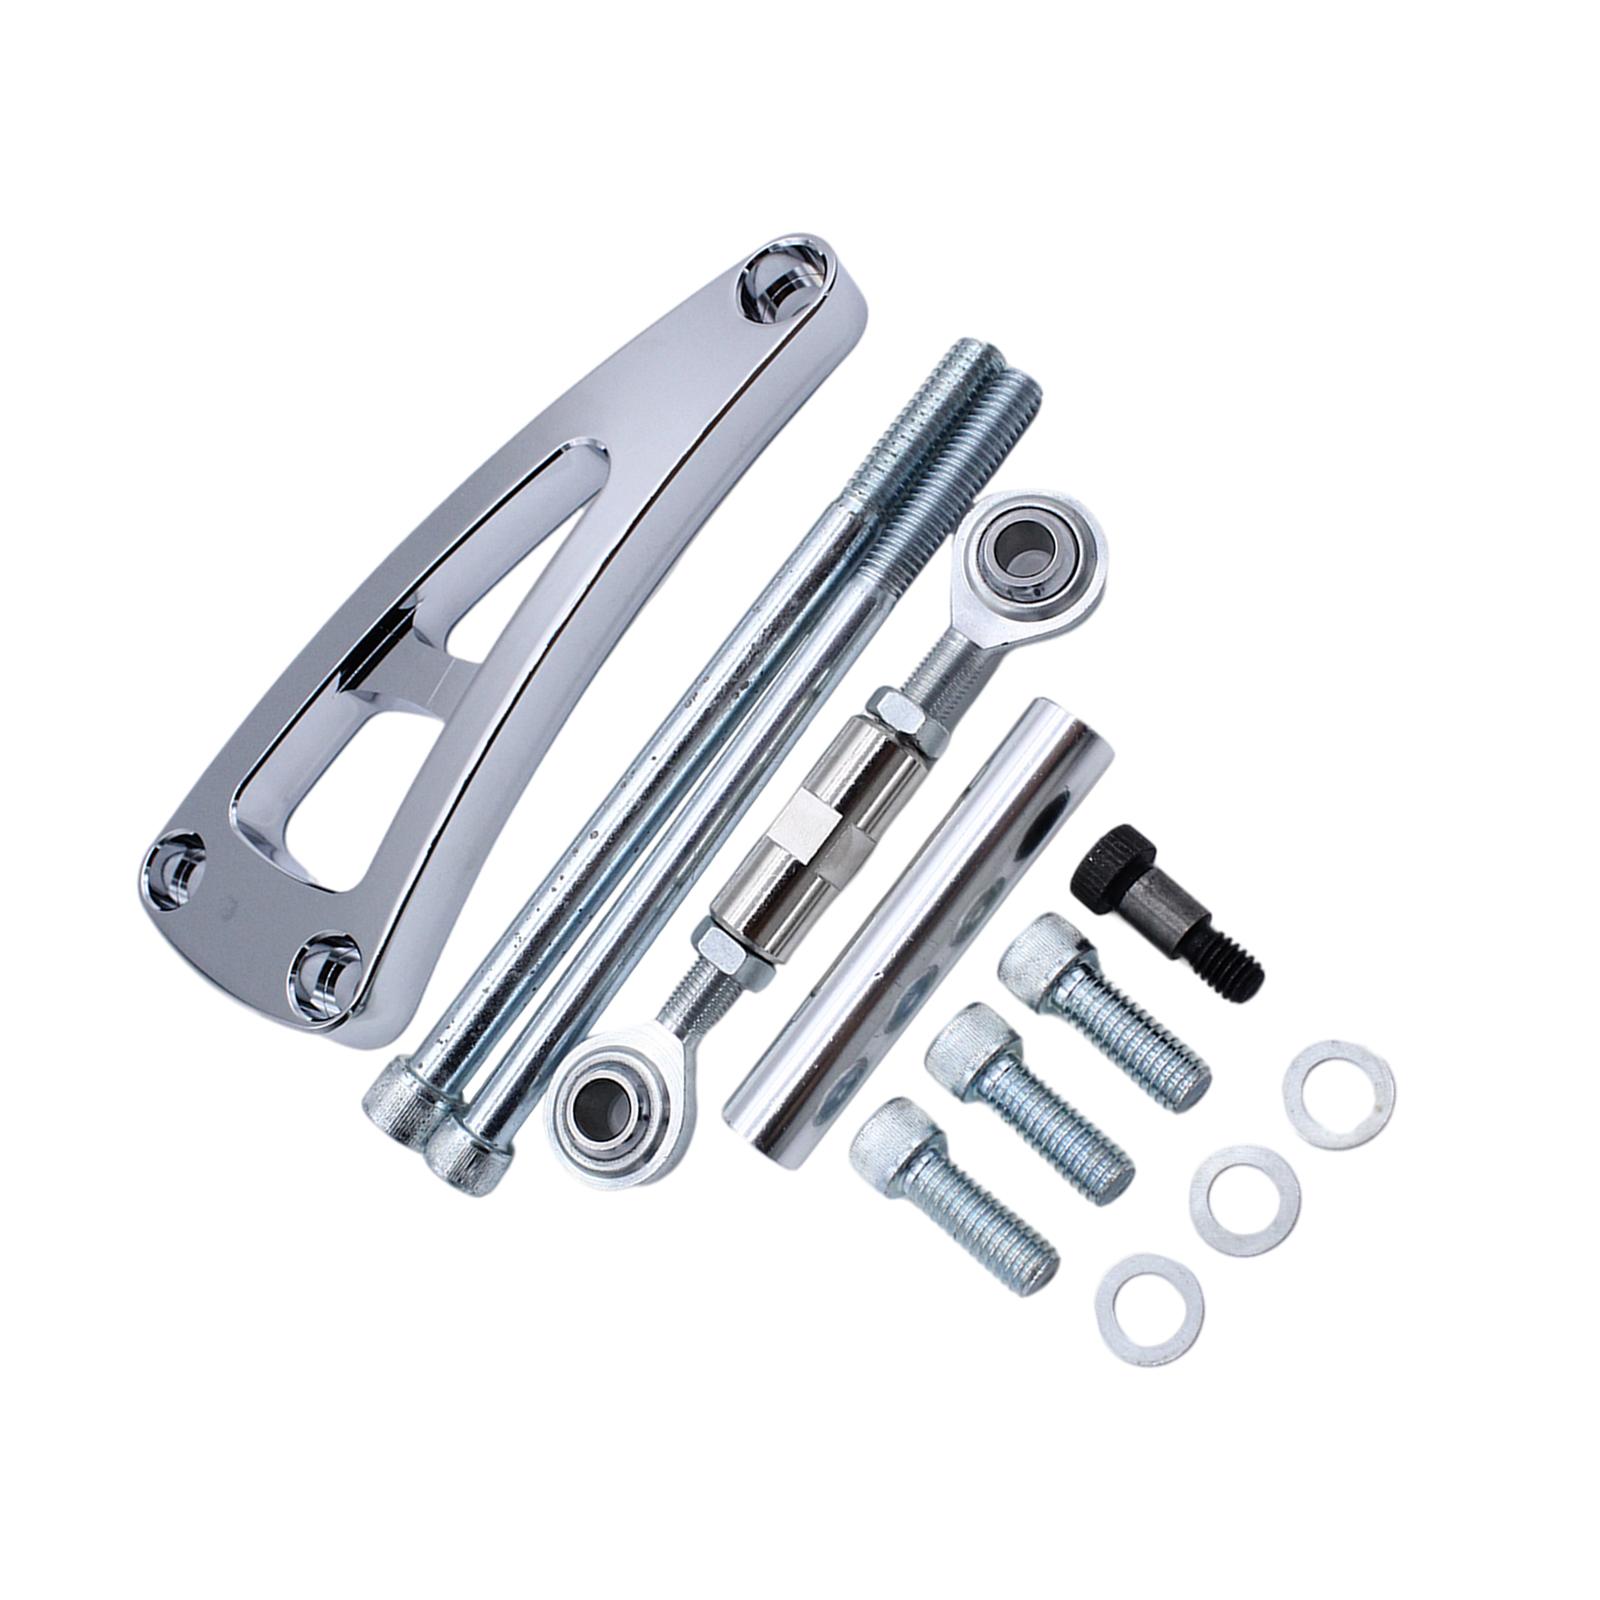 Alternator Bracket Kit with Long Water Pump Replacement Accessories Chrome Automotive Car for Chevy Engine Hz-6423-C